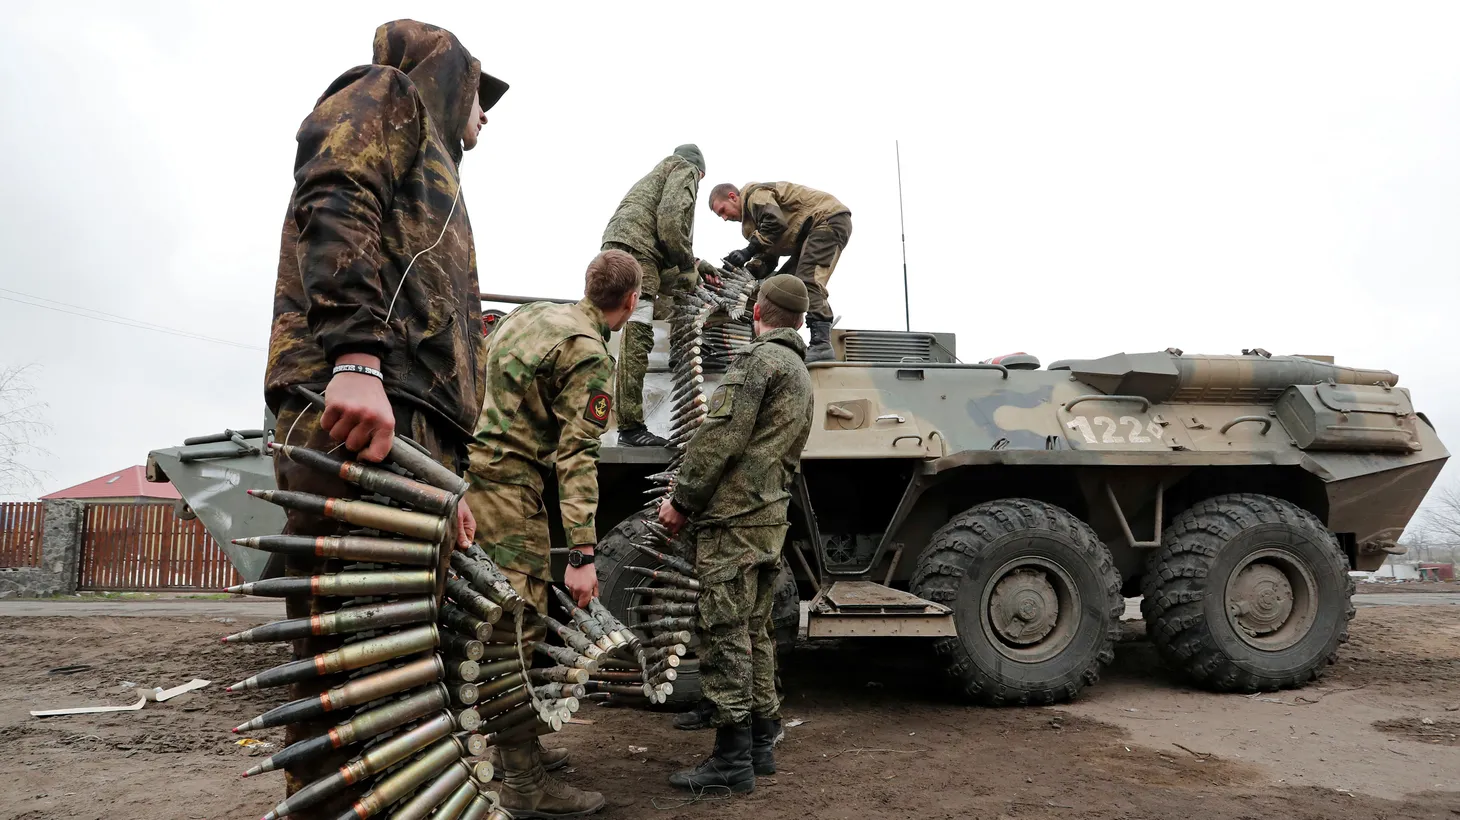 Service members of pro-Russian troops load ammunition into an armored personnel carrier during fighting in Ukraine-Russia conflict in the southern port city of Mariupol, Ukraine April 12, 2022.